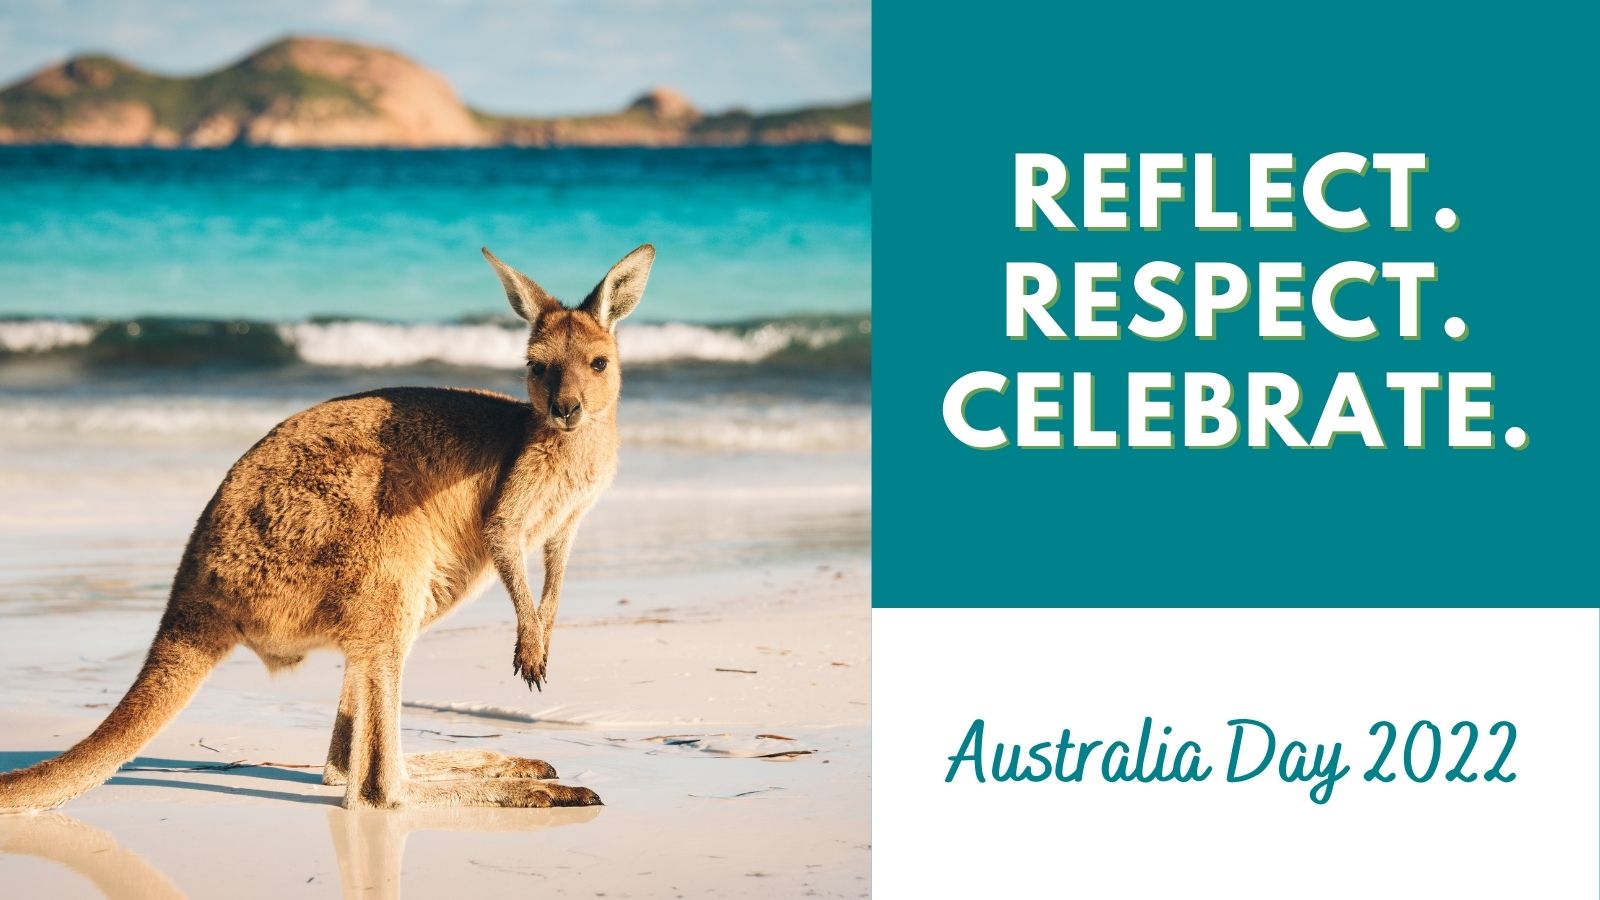 A kangaroo on a beach, with a banner 'Reflect. Respect. Celebrate"